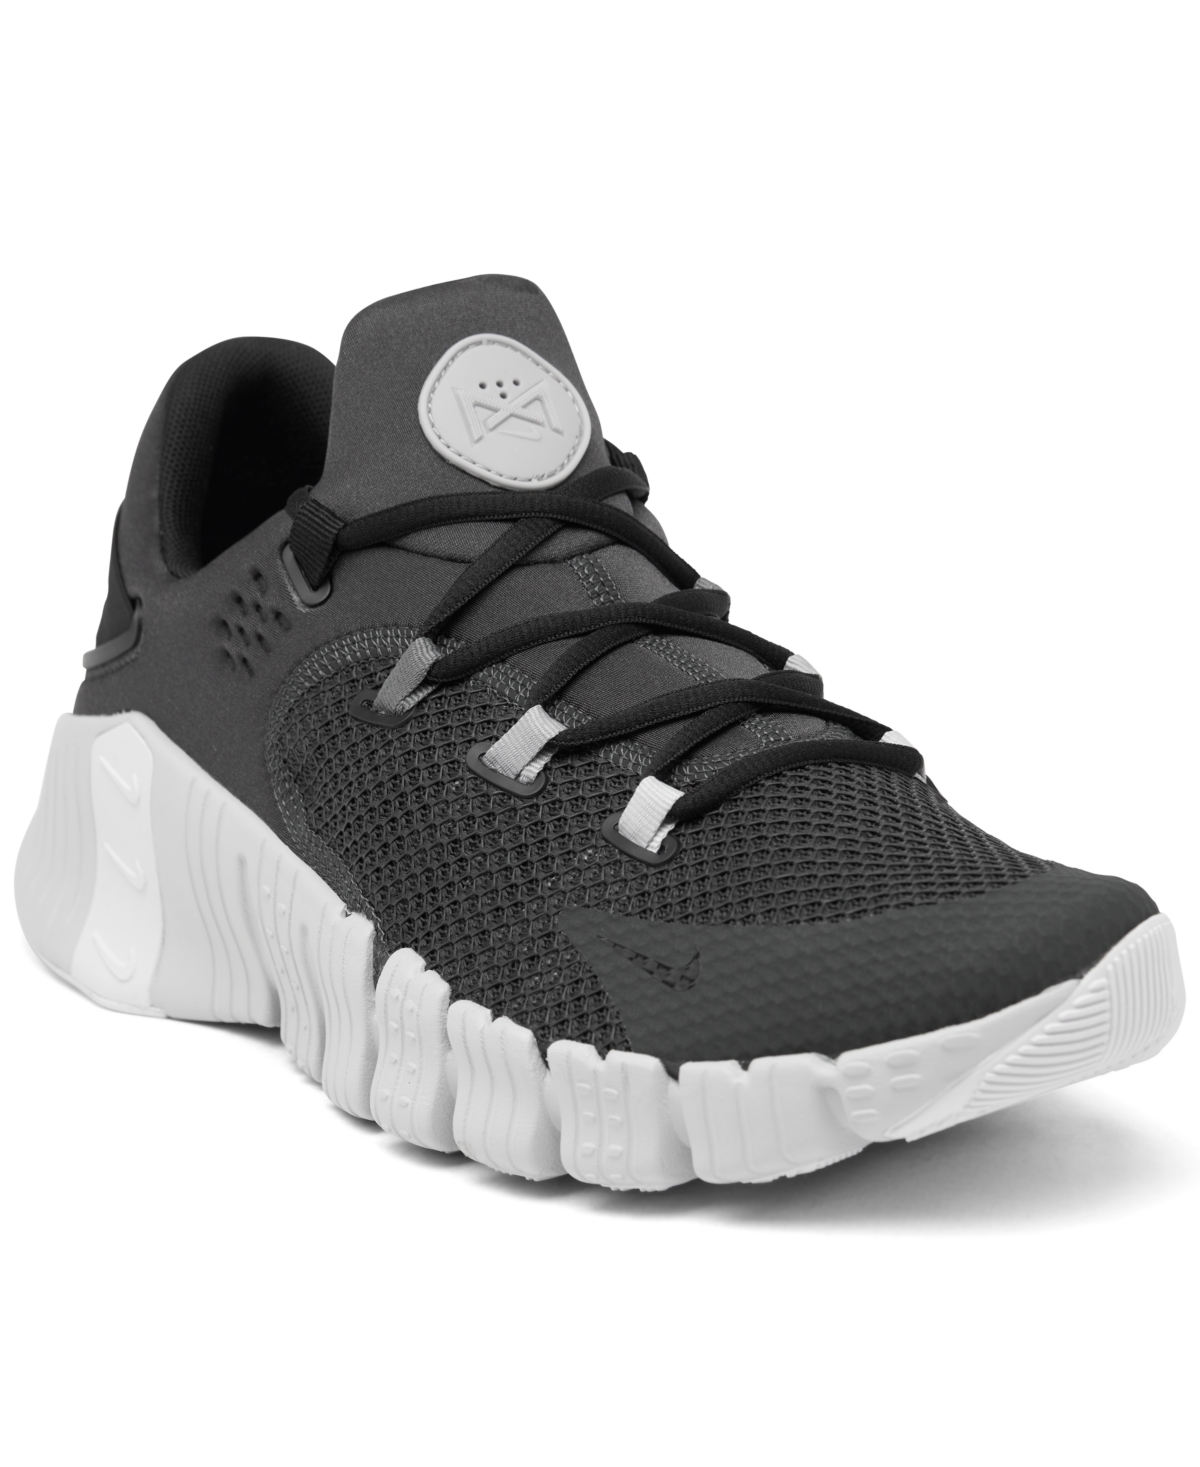 Nike Men's Free Metcon 4 Amp Training Sneakers from Finish Line